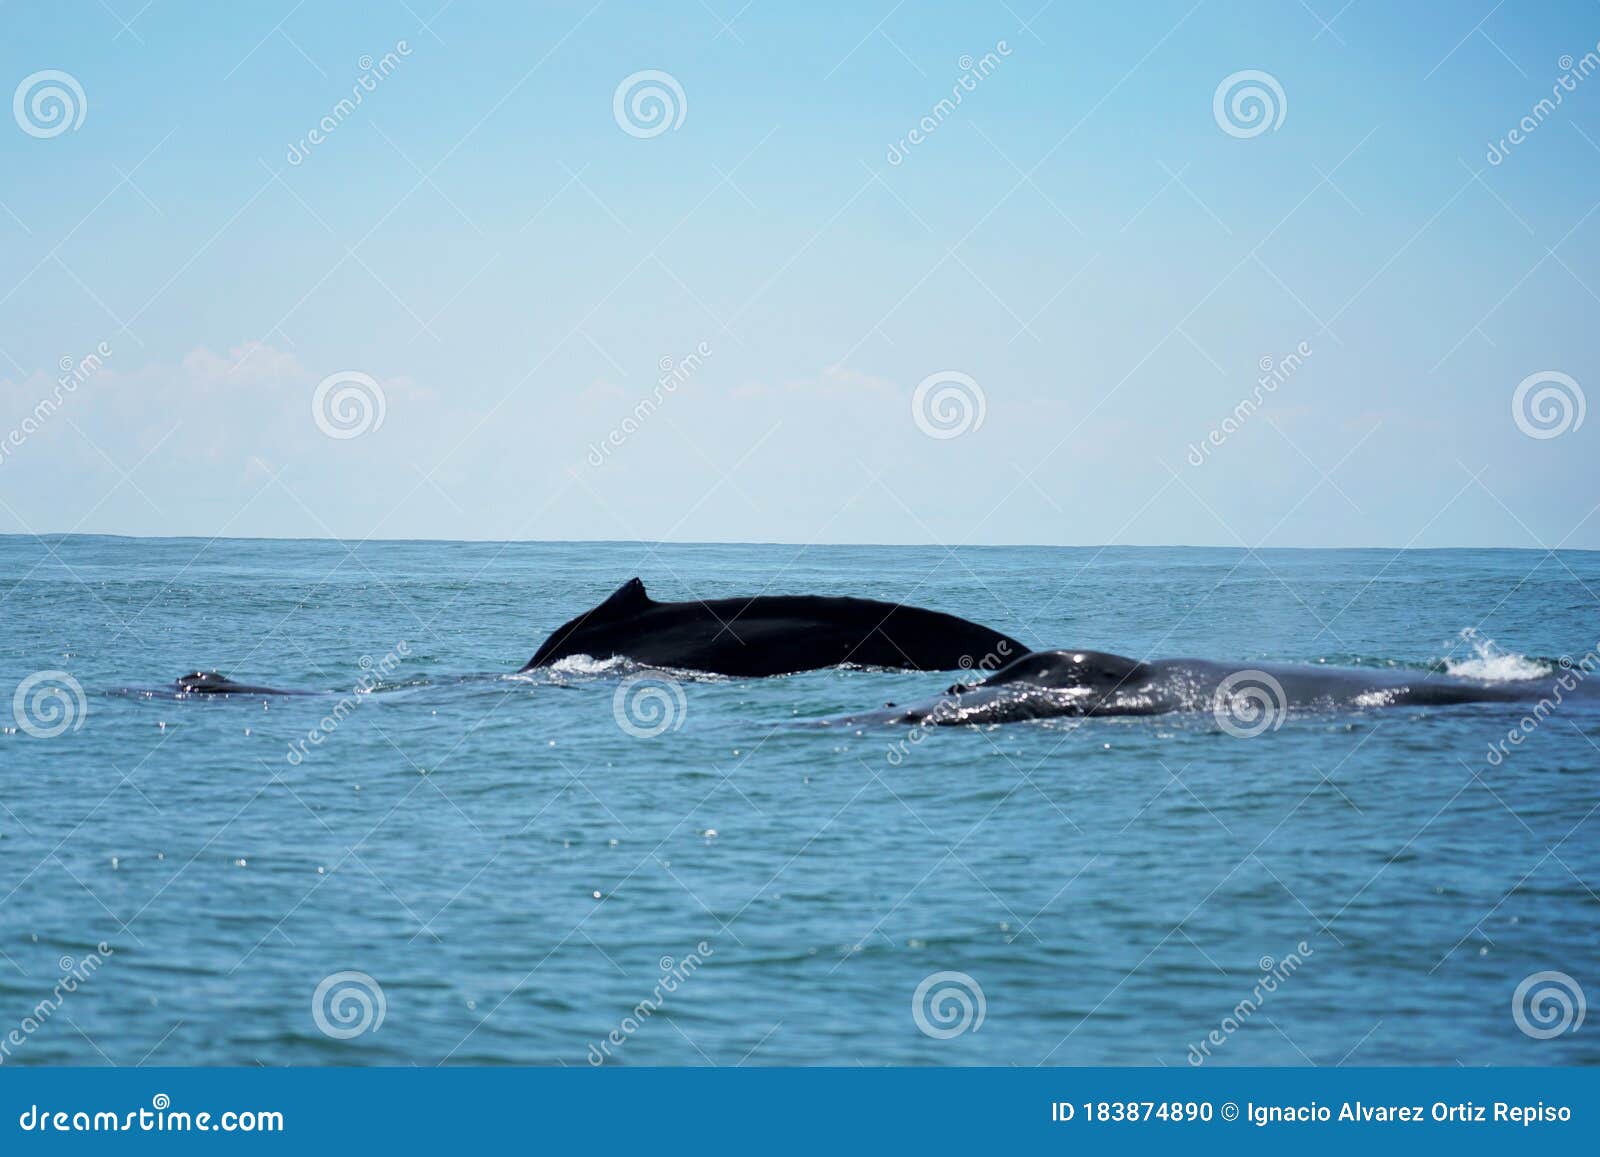 group of humpback whales in corcovado national park of costa rica